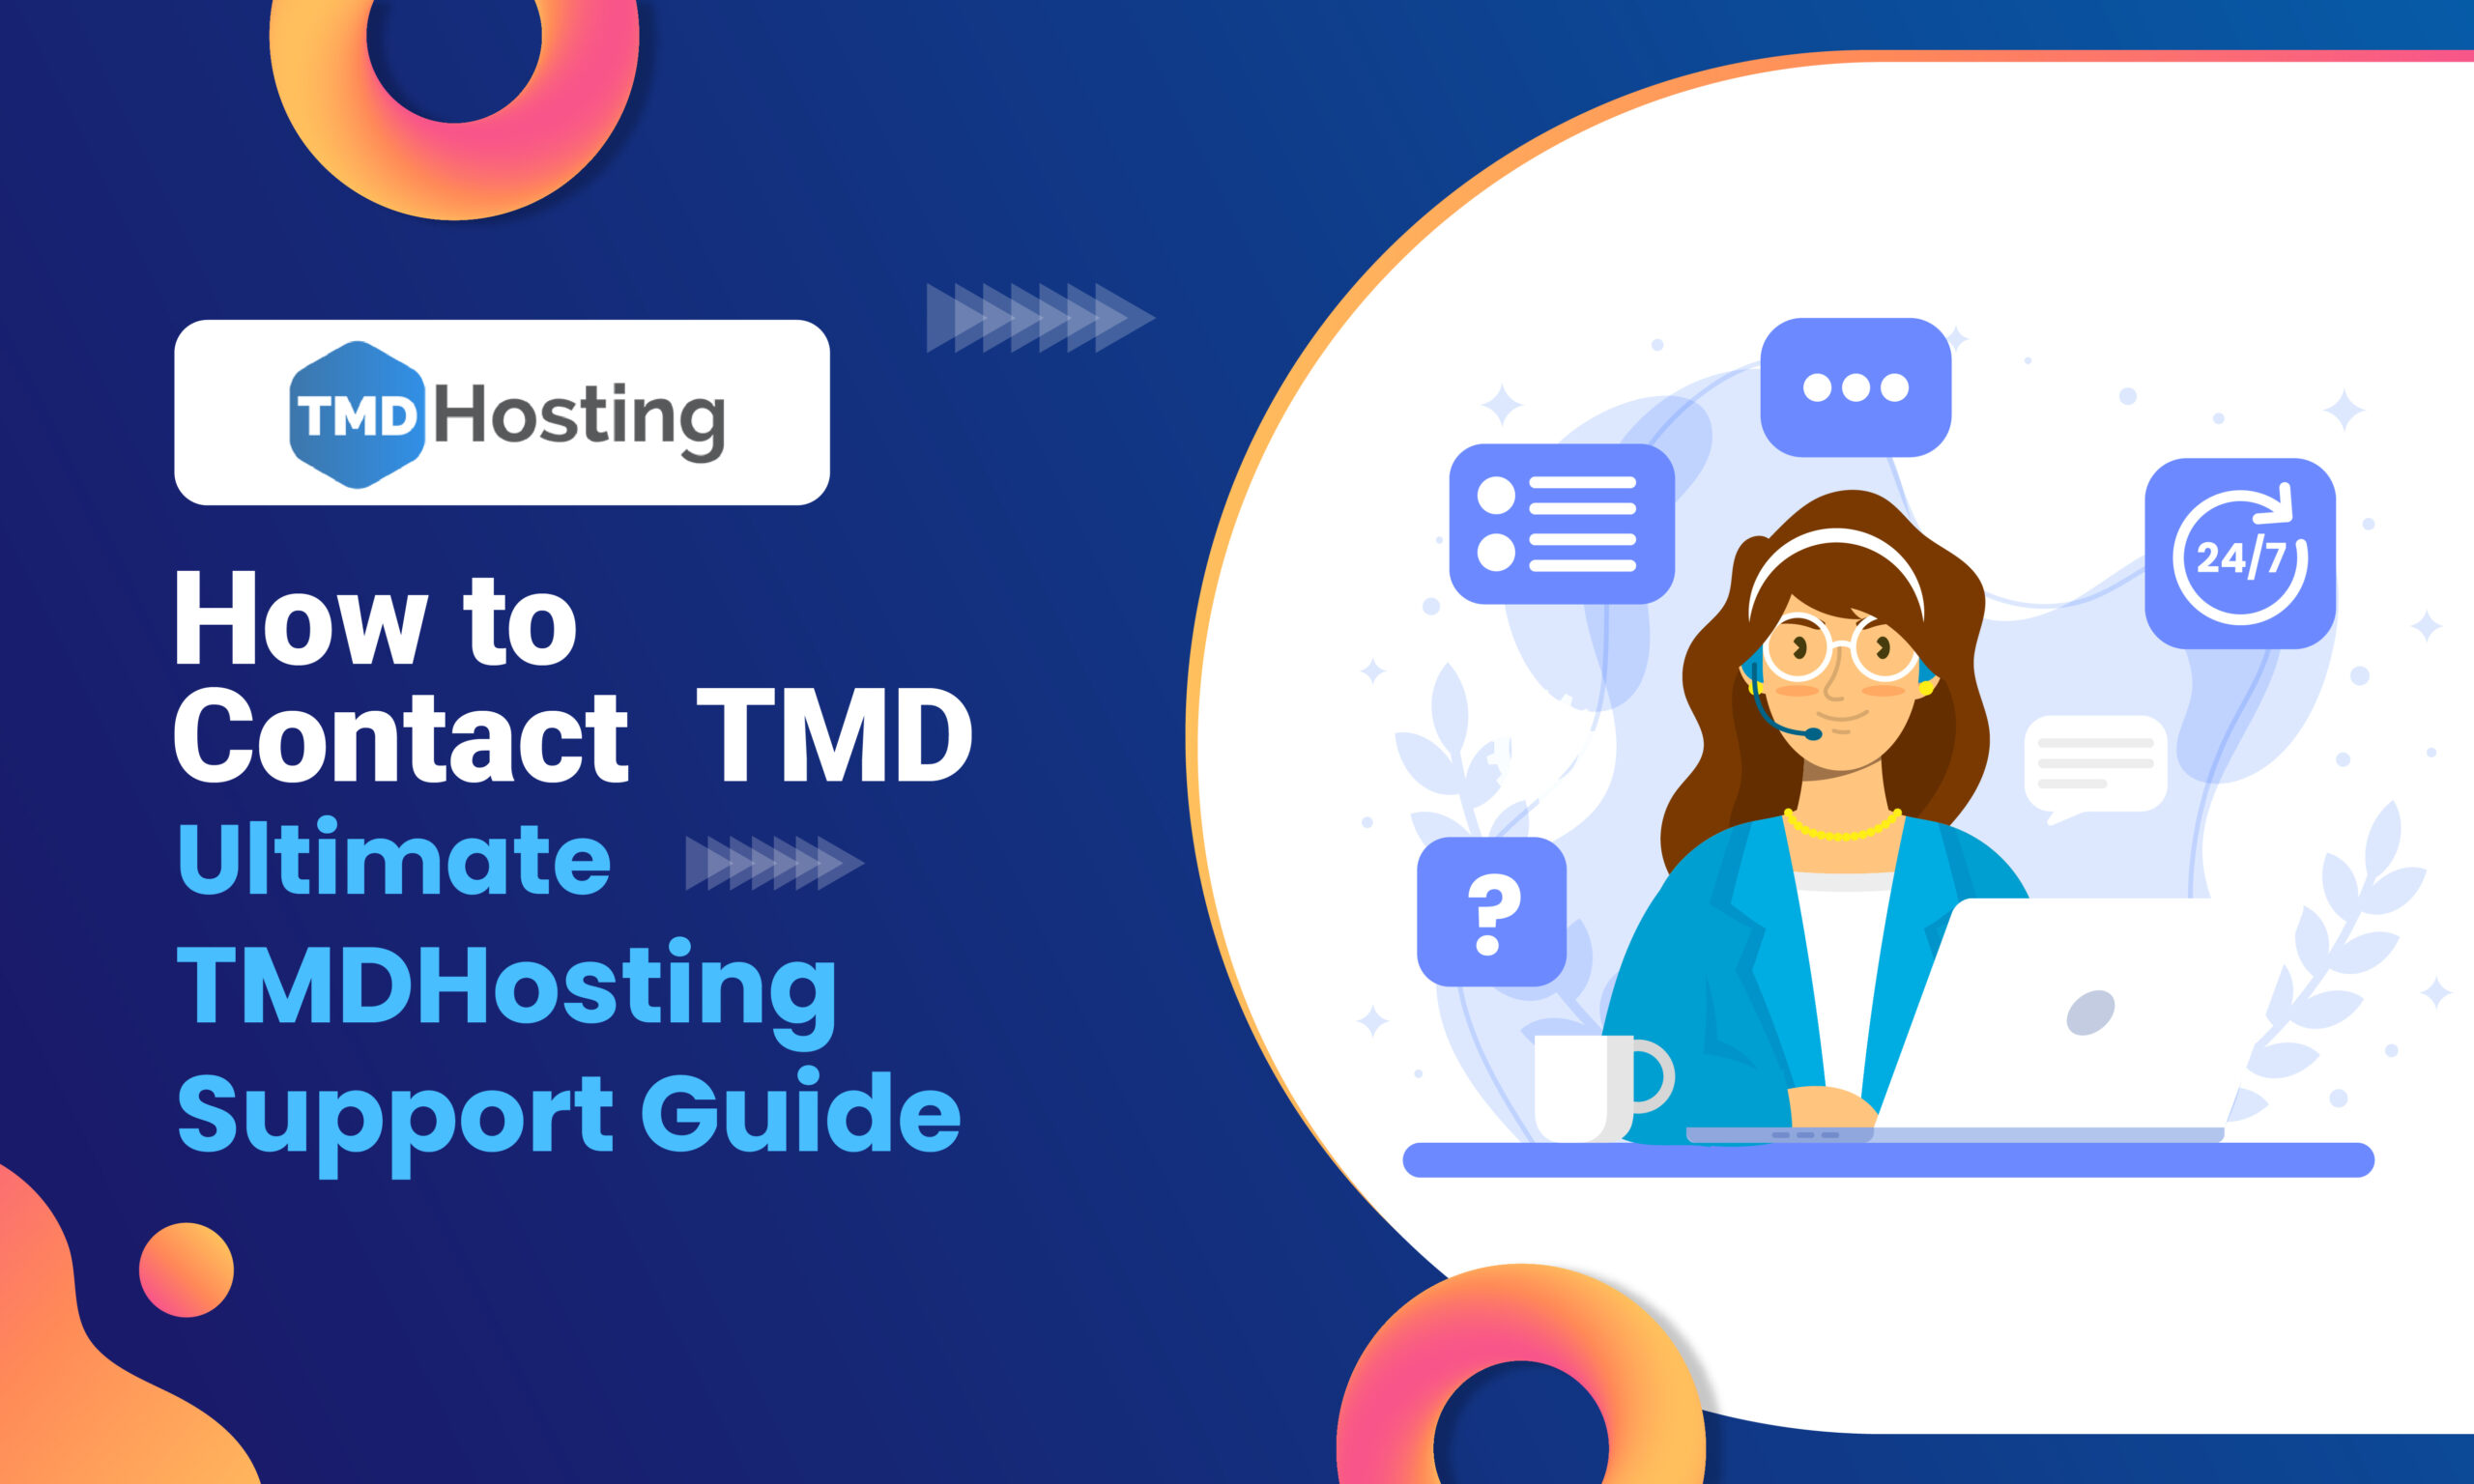 TMD Hosting Support